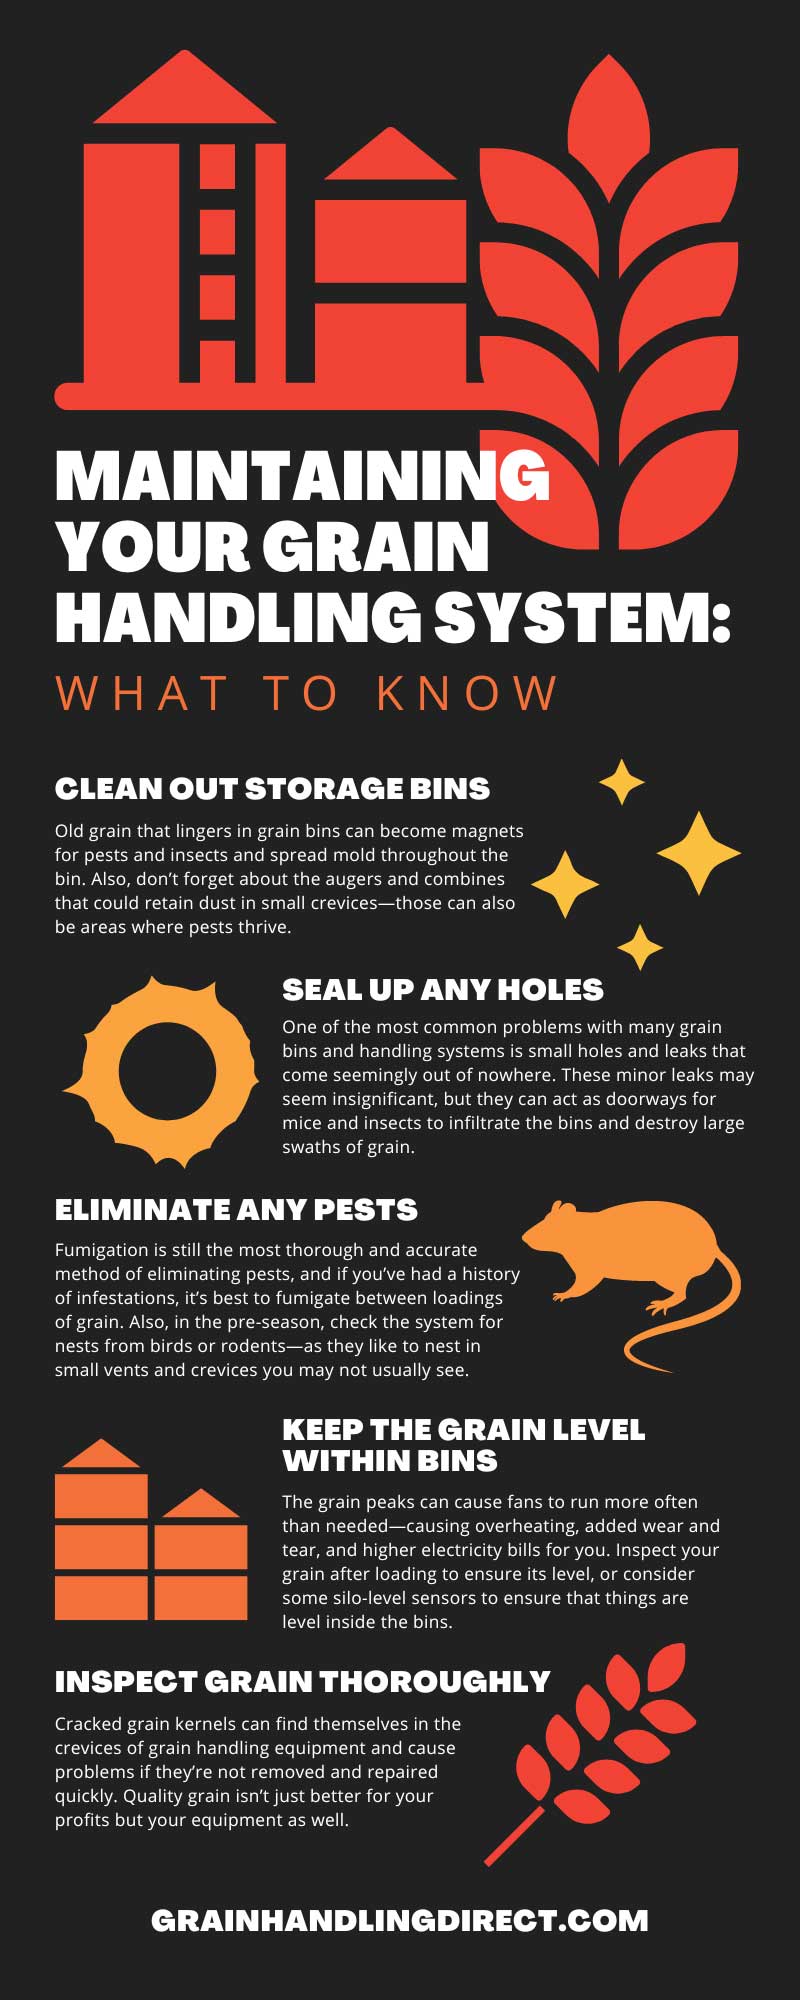 Maintaining Your Grain Handling System: What To Know